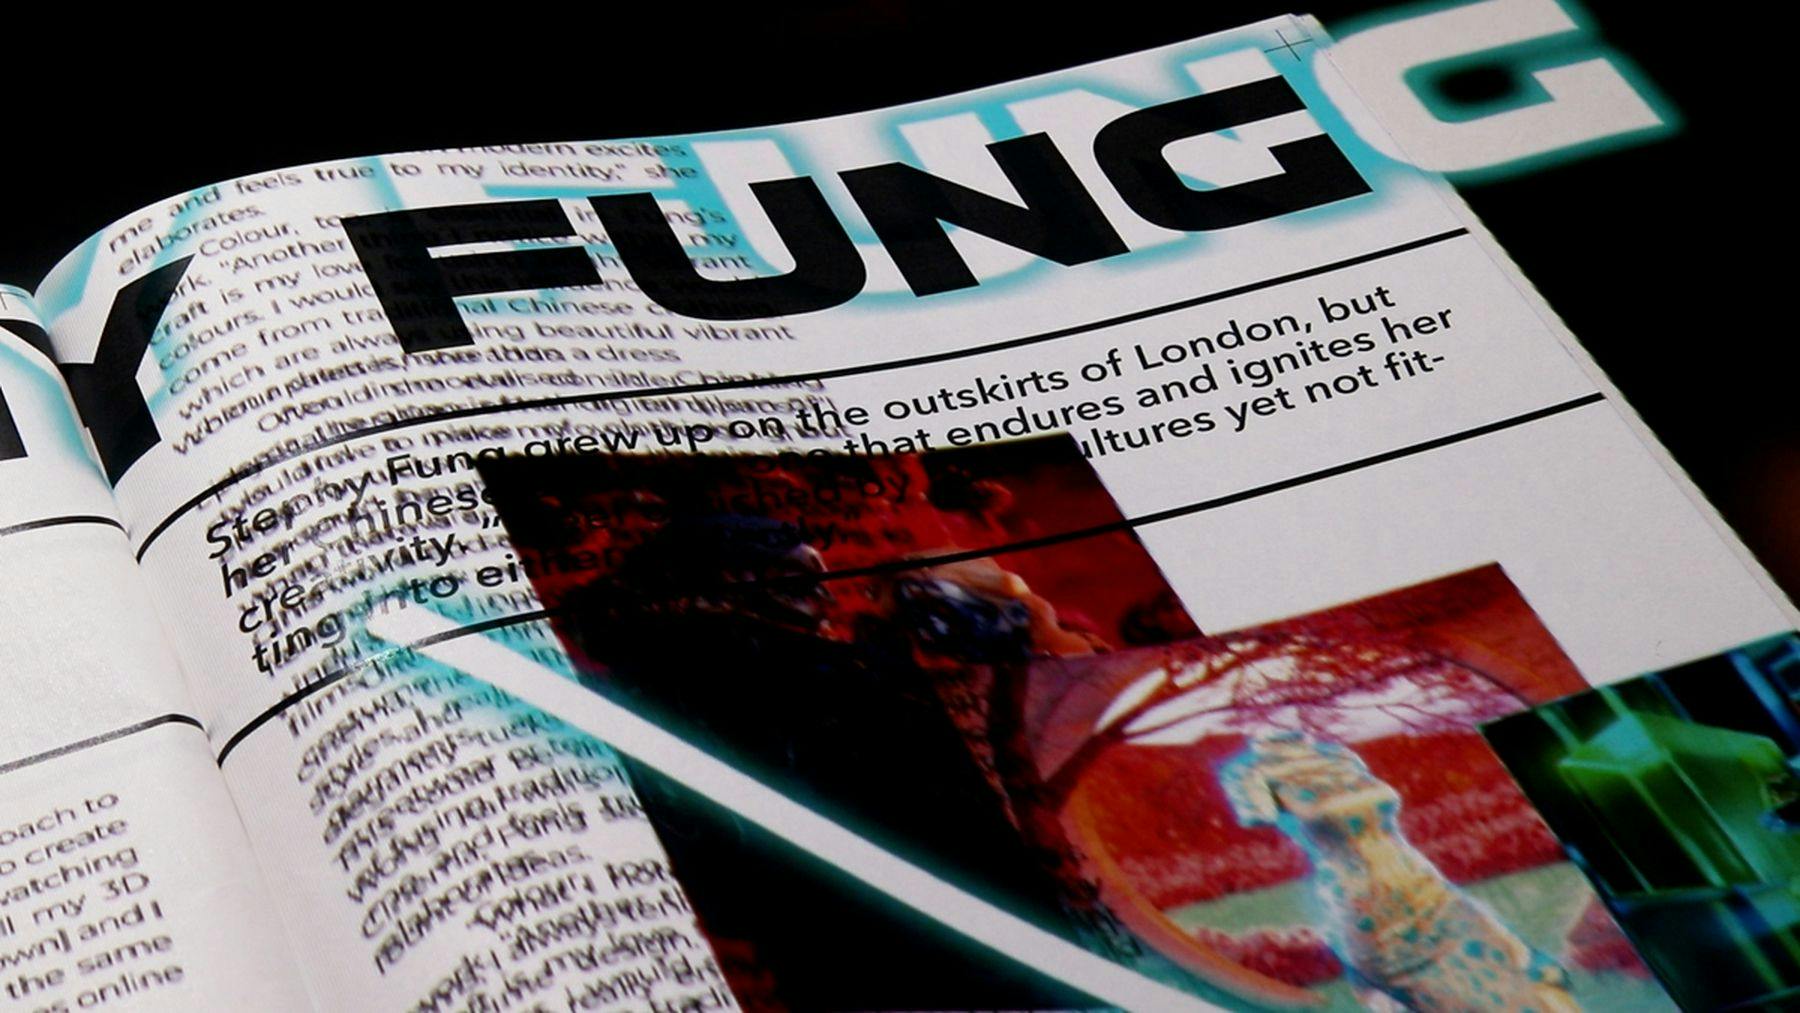 A digital design showing the left-hand corner of a magazine page, part of a title “Fungg” appears. Below are paragraphs of text behind three overlapping images.